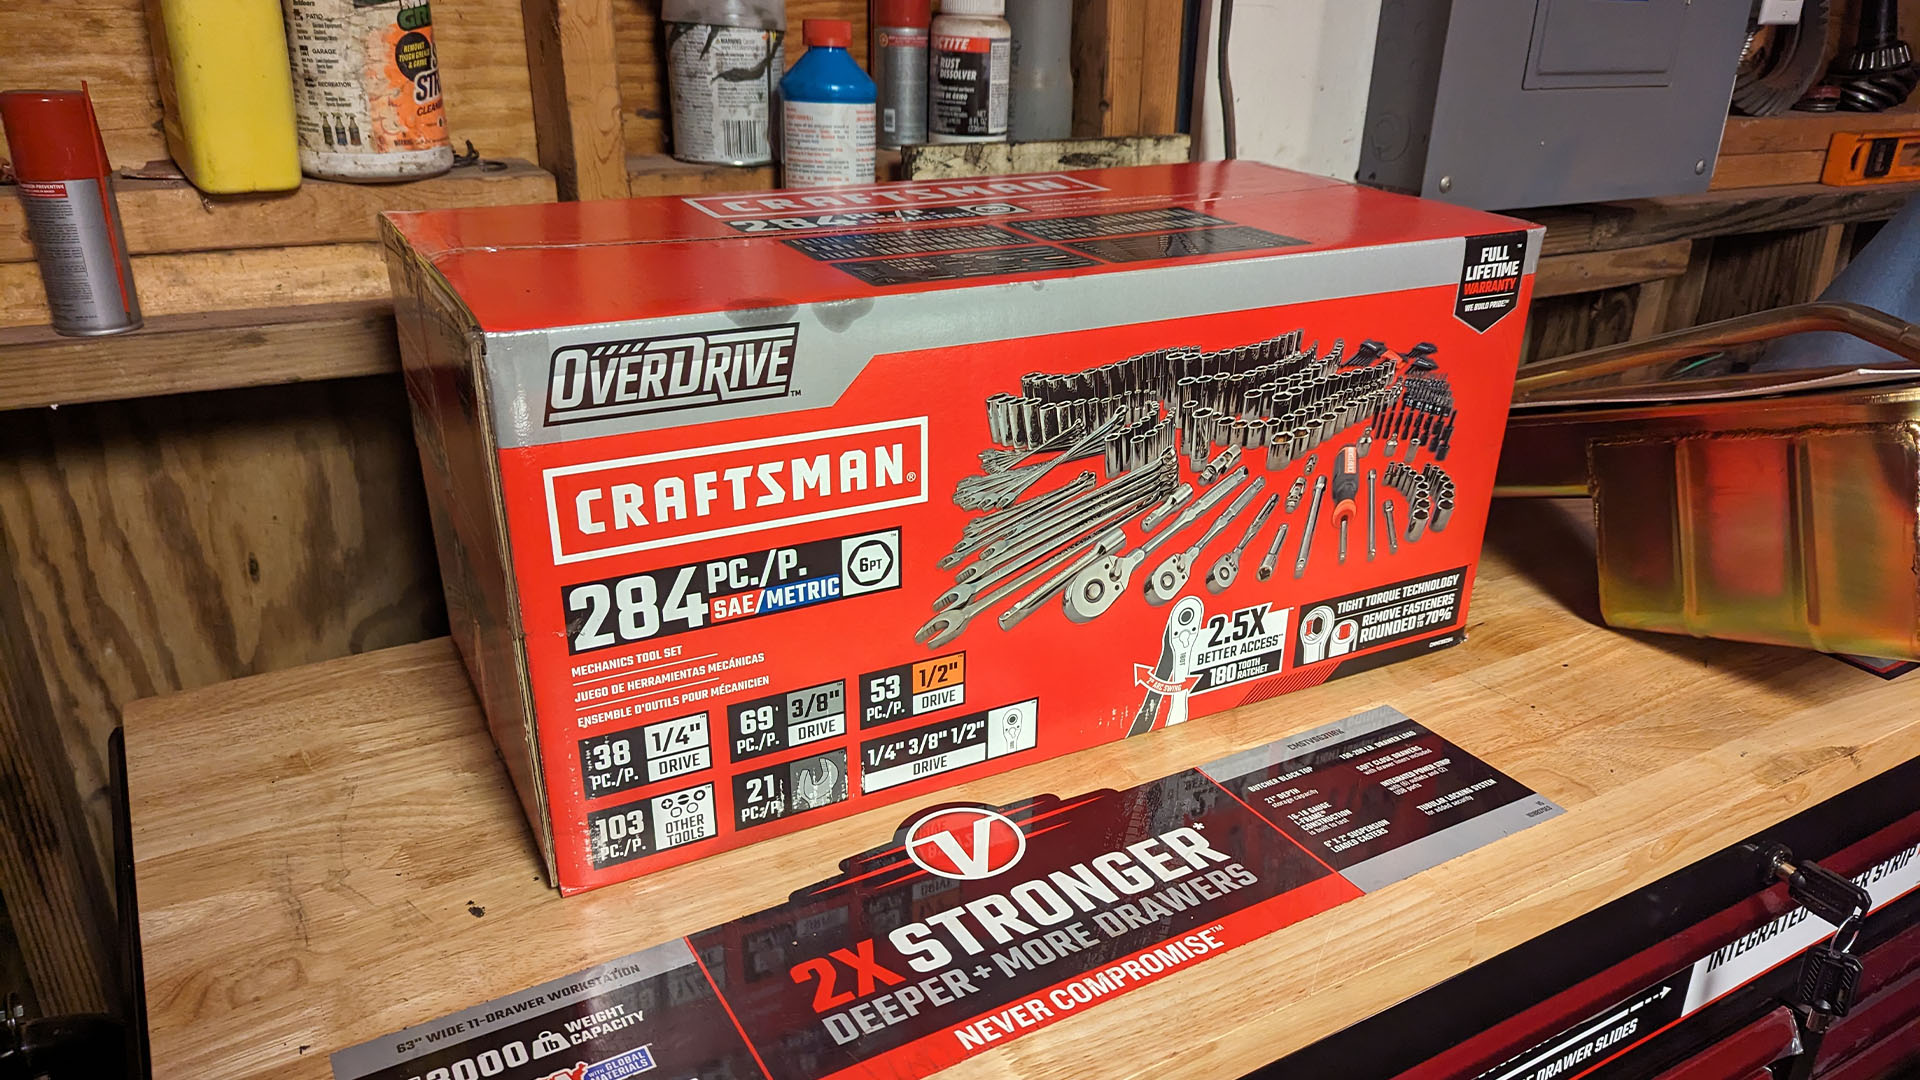 Craftsman Overdrive Mechanic's Tool Set Review